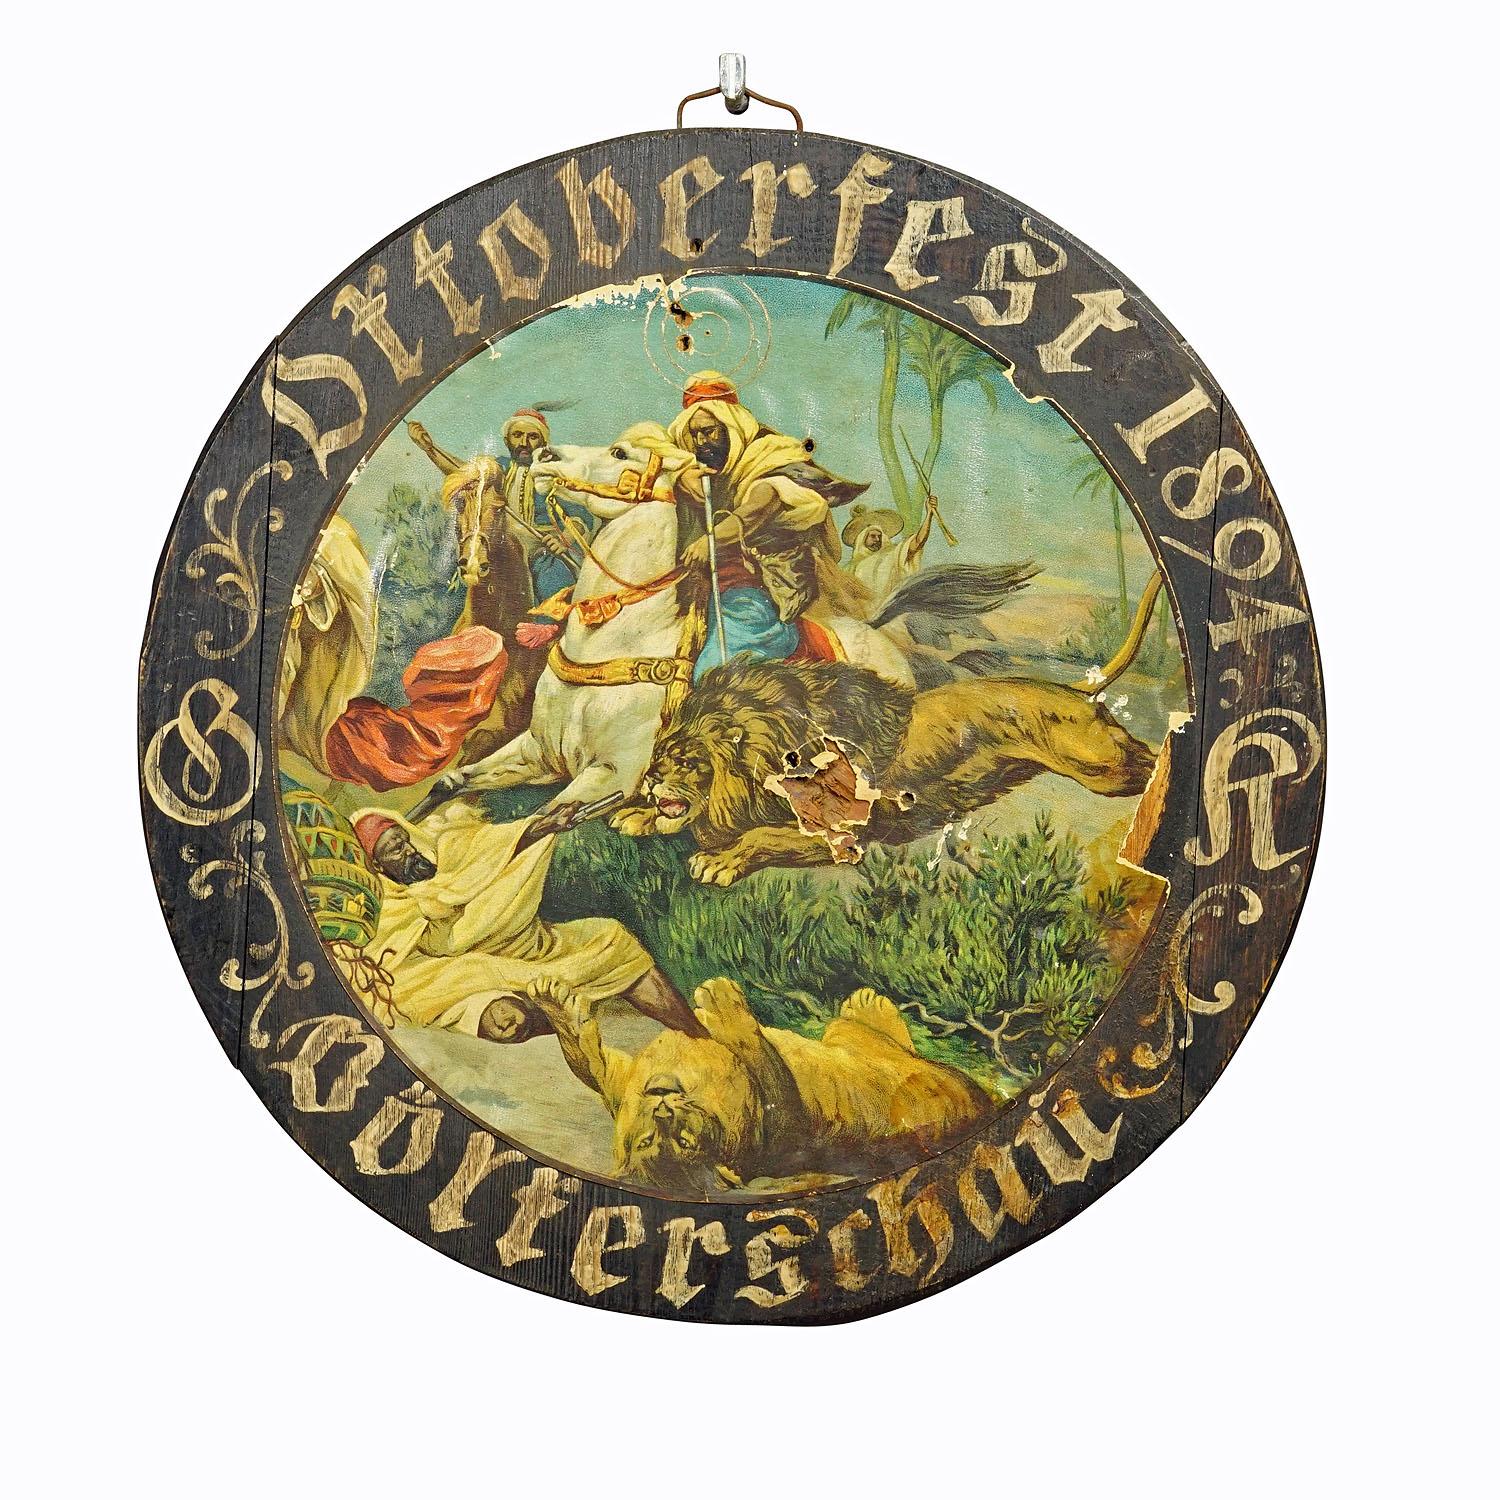 Antique Oktoberfest Marksman Target Plaque, 1894

A rare wooden shooting target plaque with handwritten inscriptions and a print featuring the lion hunt in Arabia. This rare plaque was used on the folk show of the Munich Oktoberfest in 1894.